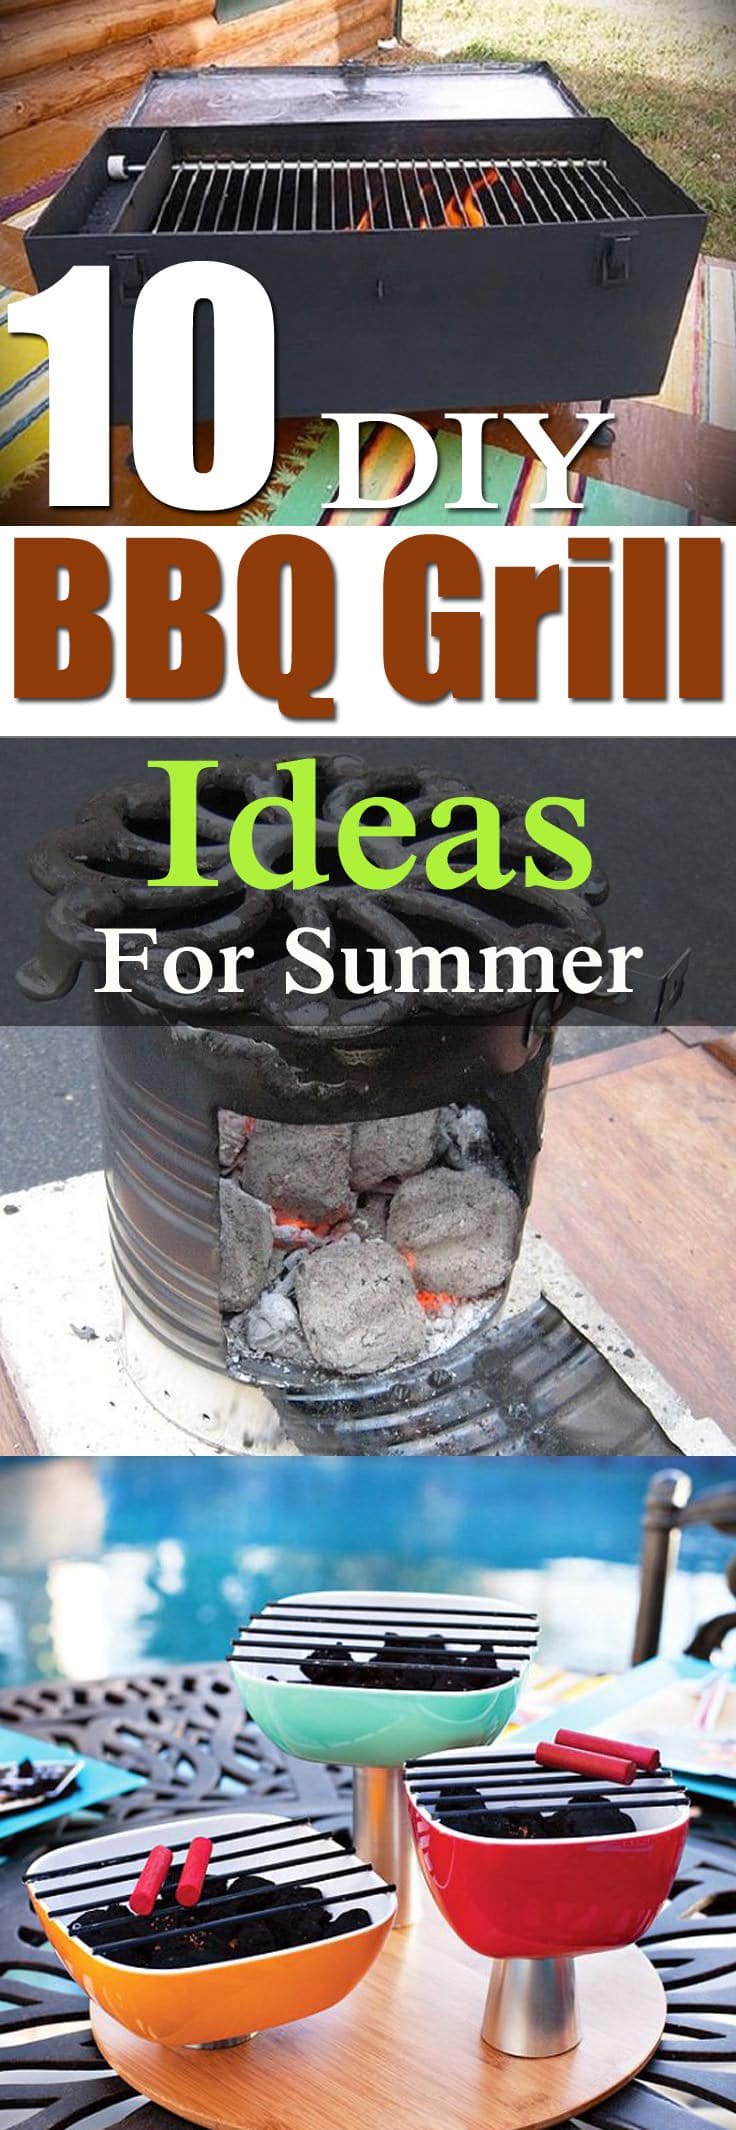 10 DIY BBQ Grill Ideas that are inexpensive and easy to follow for the summer, so that you can enjoy outdoor grilled recipes in your backyard or balcony!